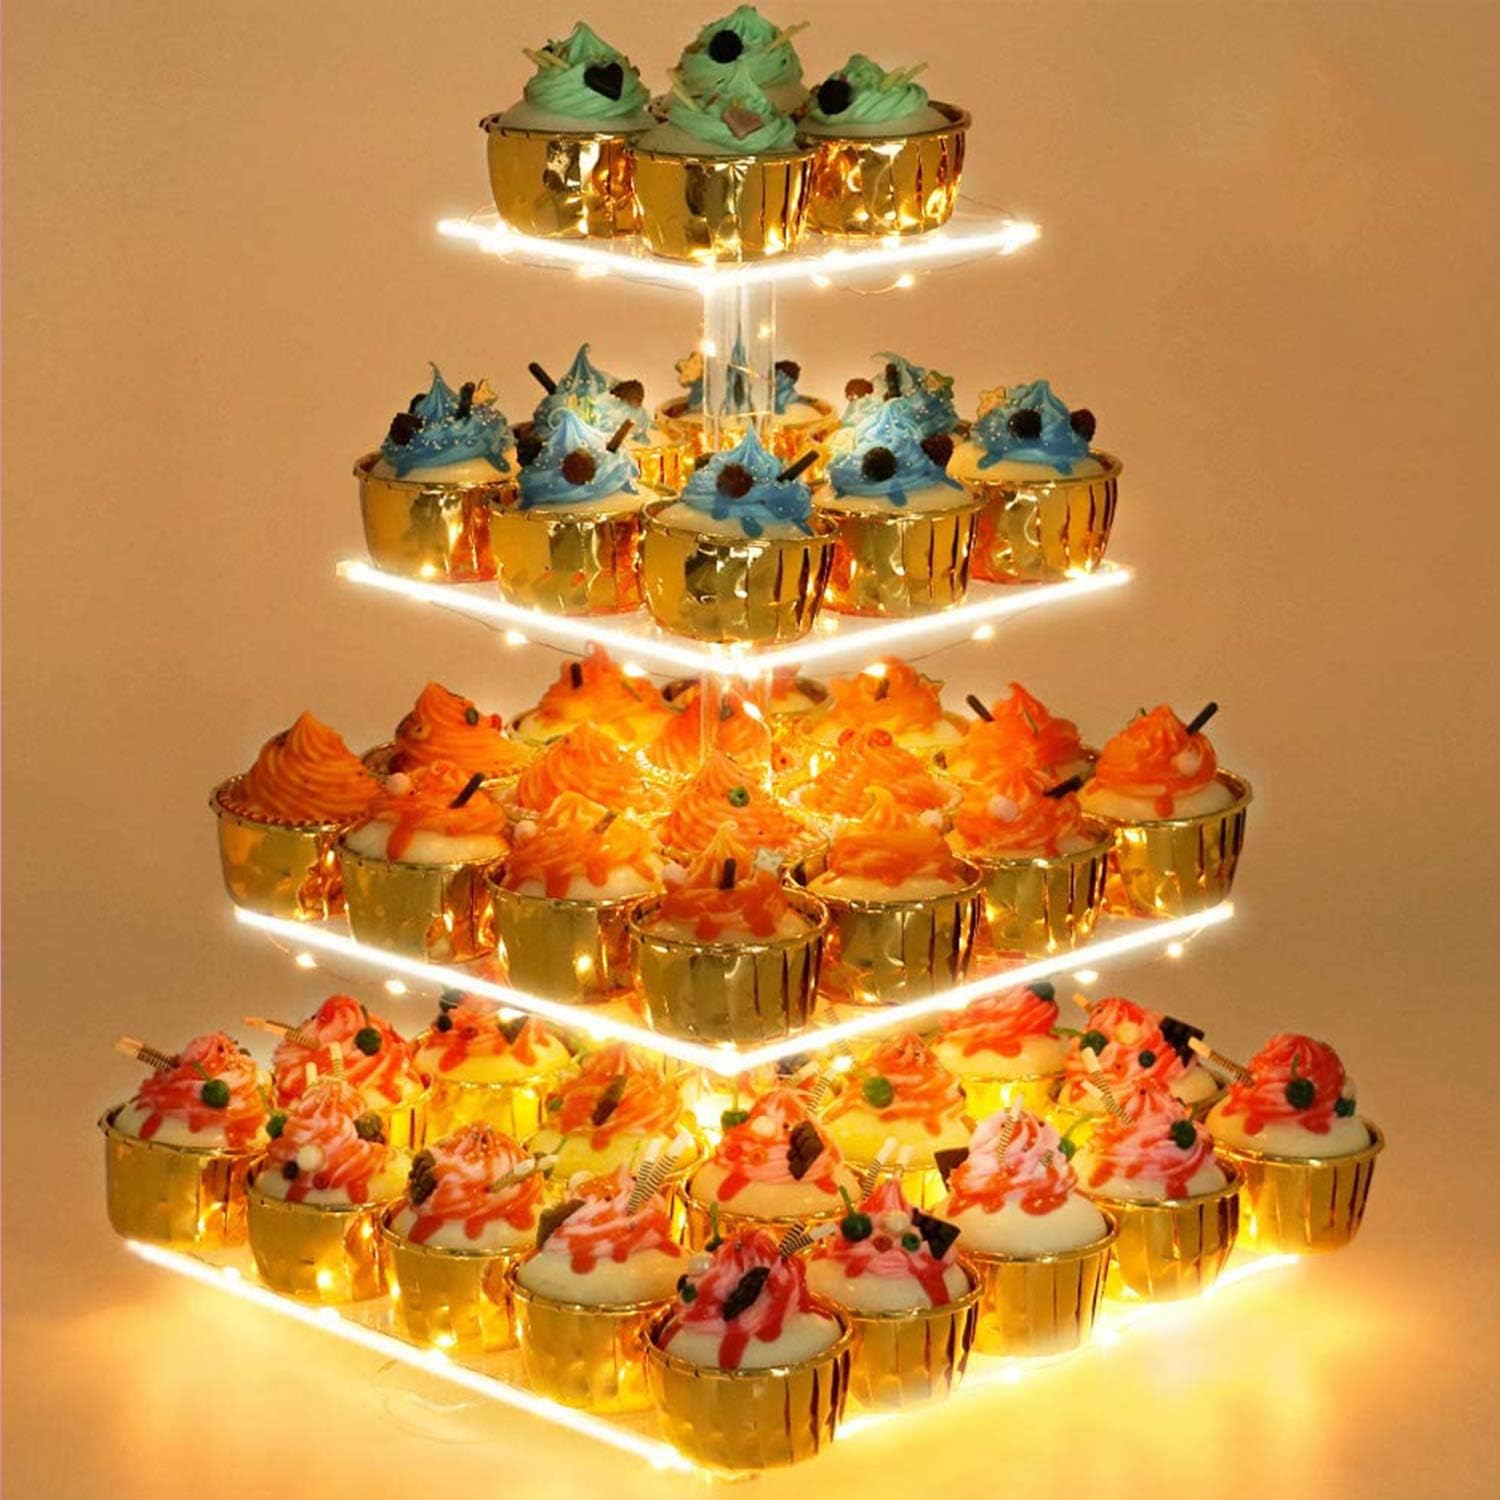 YestBuy 4 Tier Cupcake Stand Acrylic Tower Display with LED Light Premium